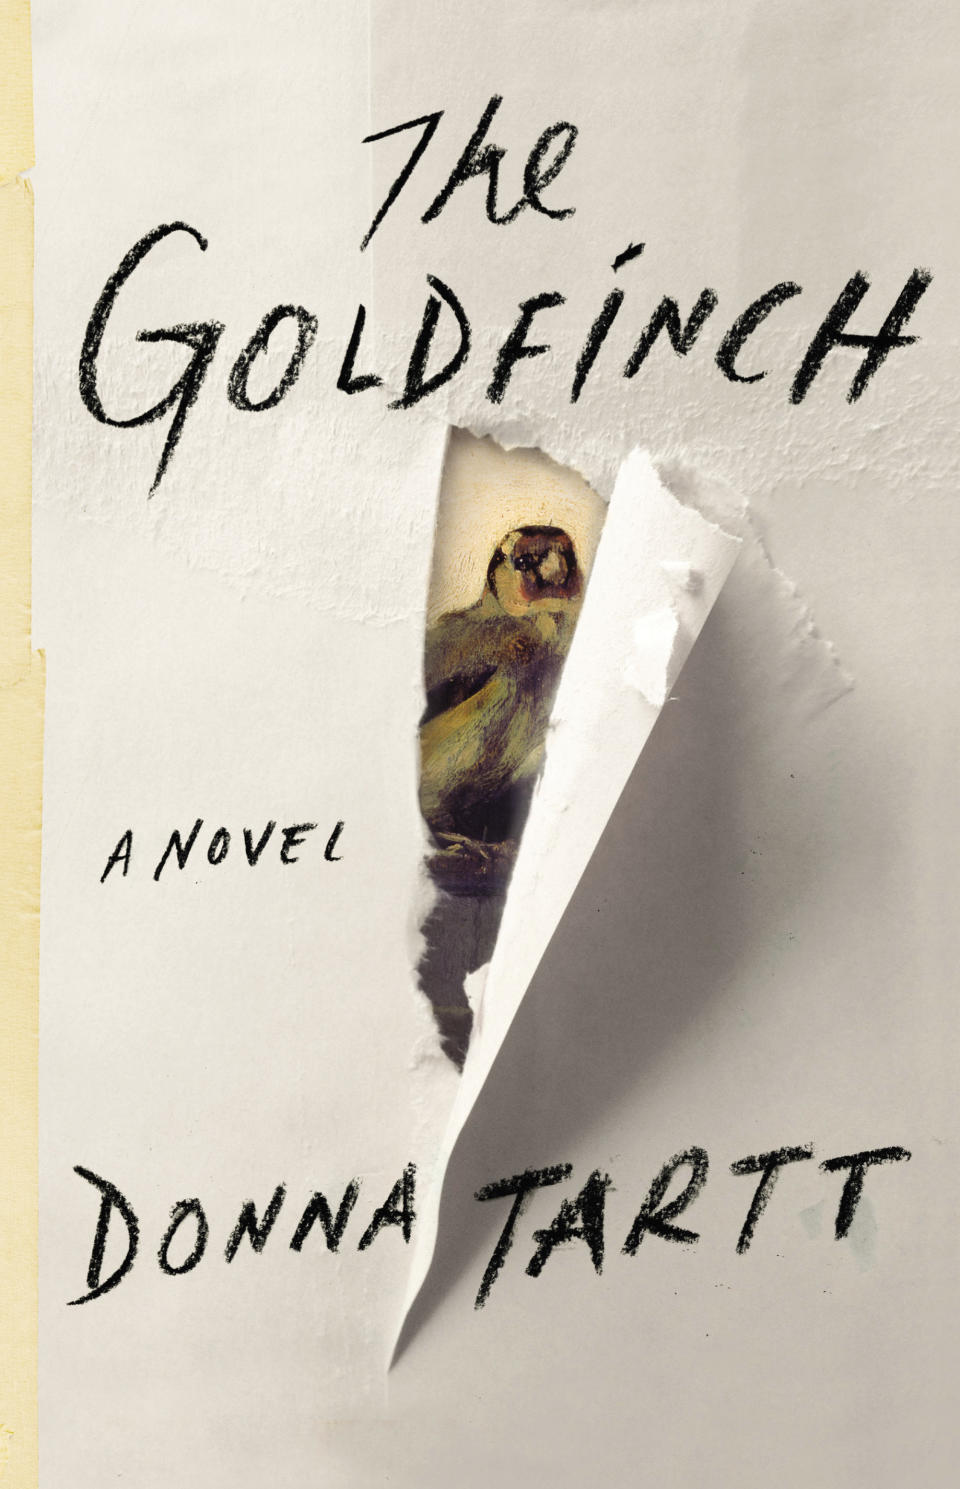 This book cover image released by Little, Brown and Company shows "The Goldfinch," by Donna Tartt. The novel will be released on Oct. 22. (AP Photo/Little, Brown and Company)